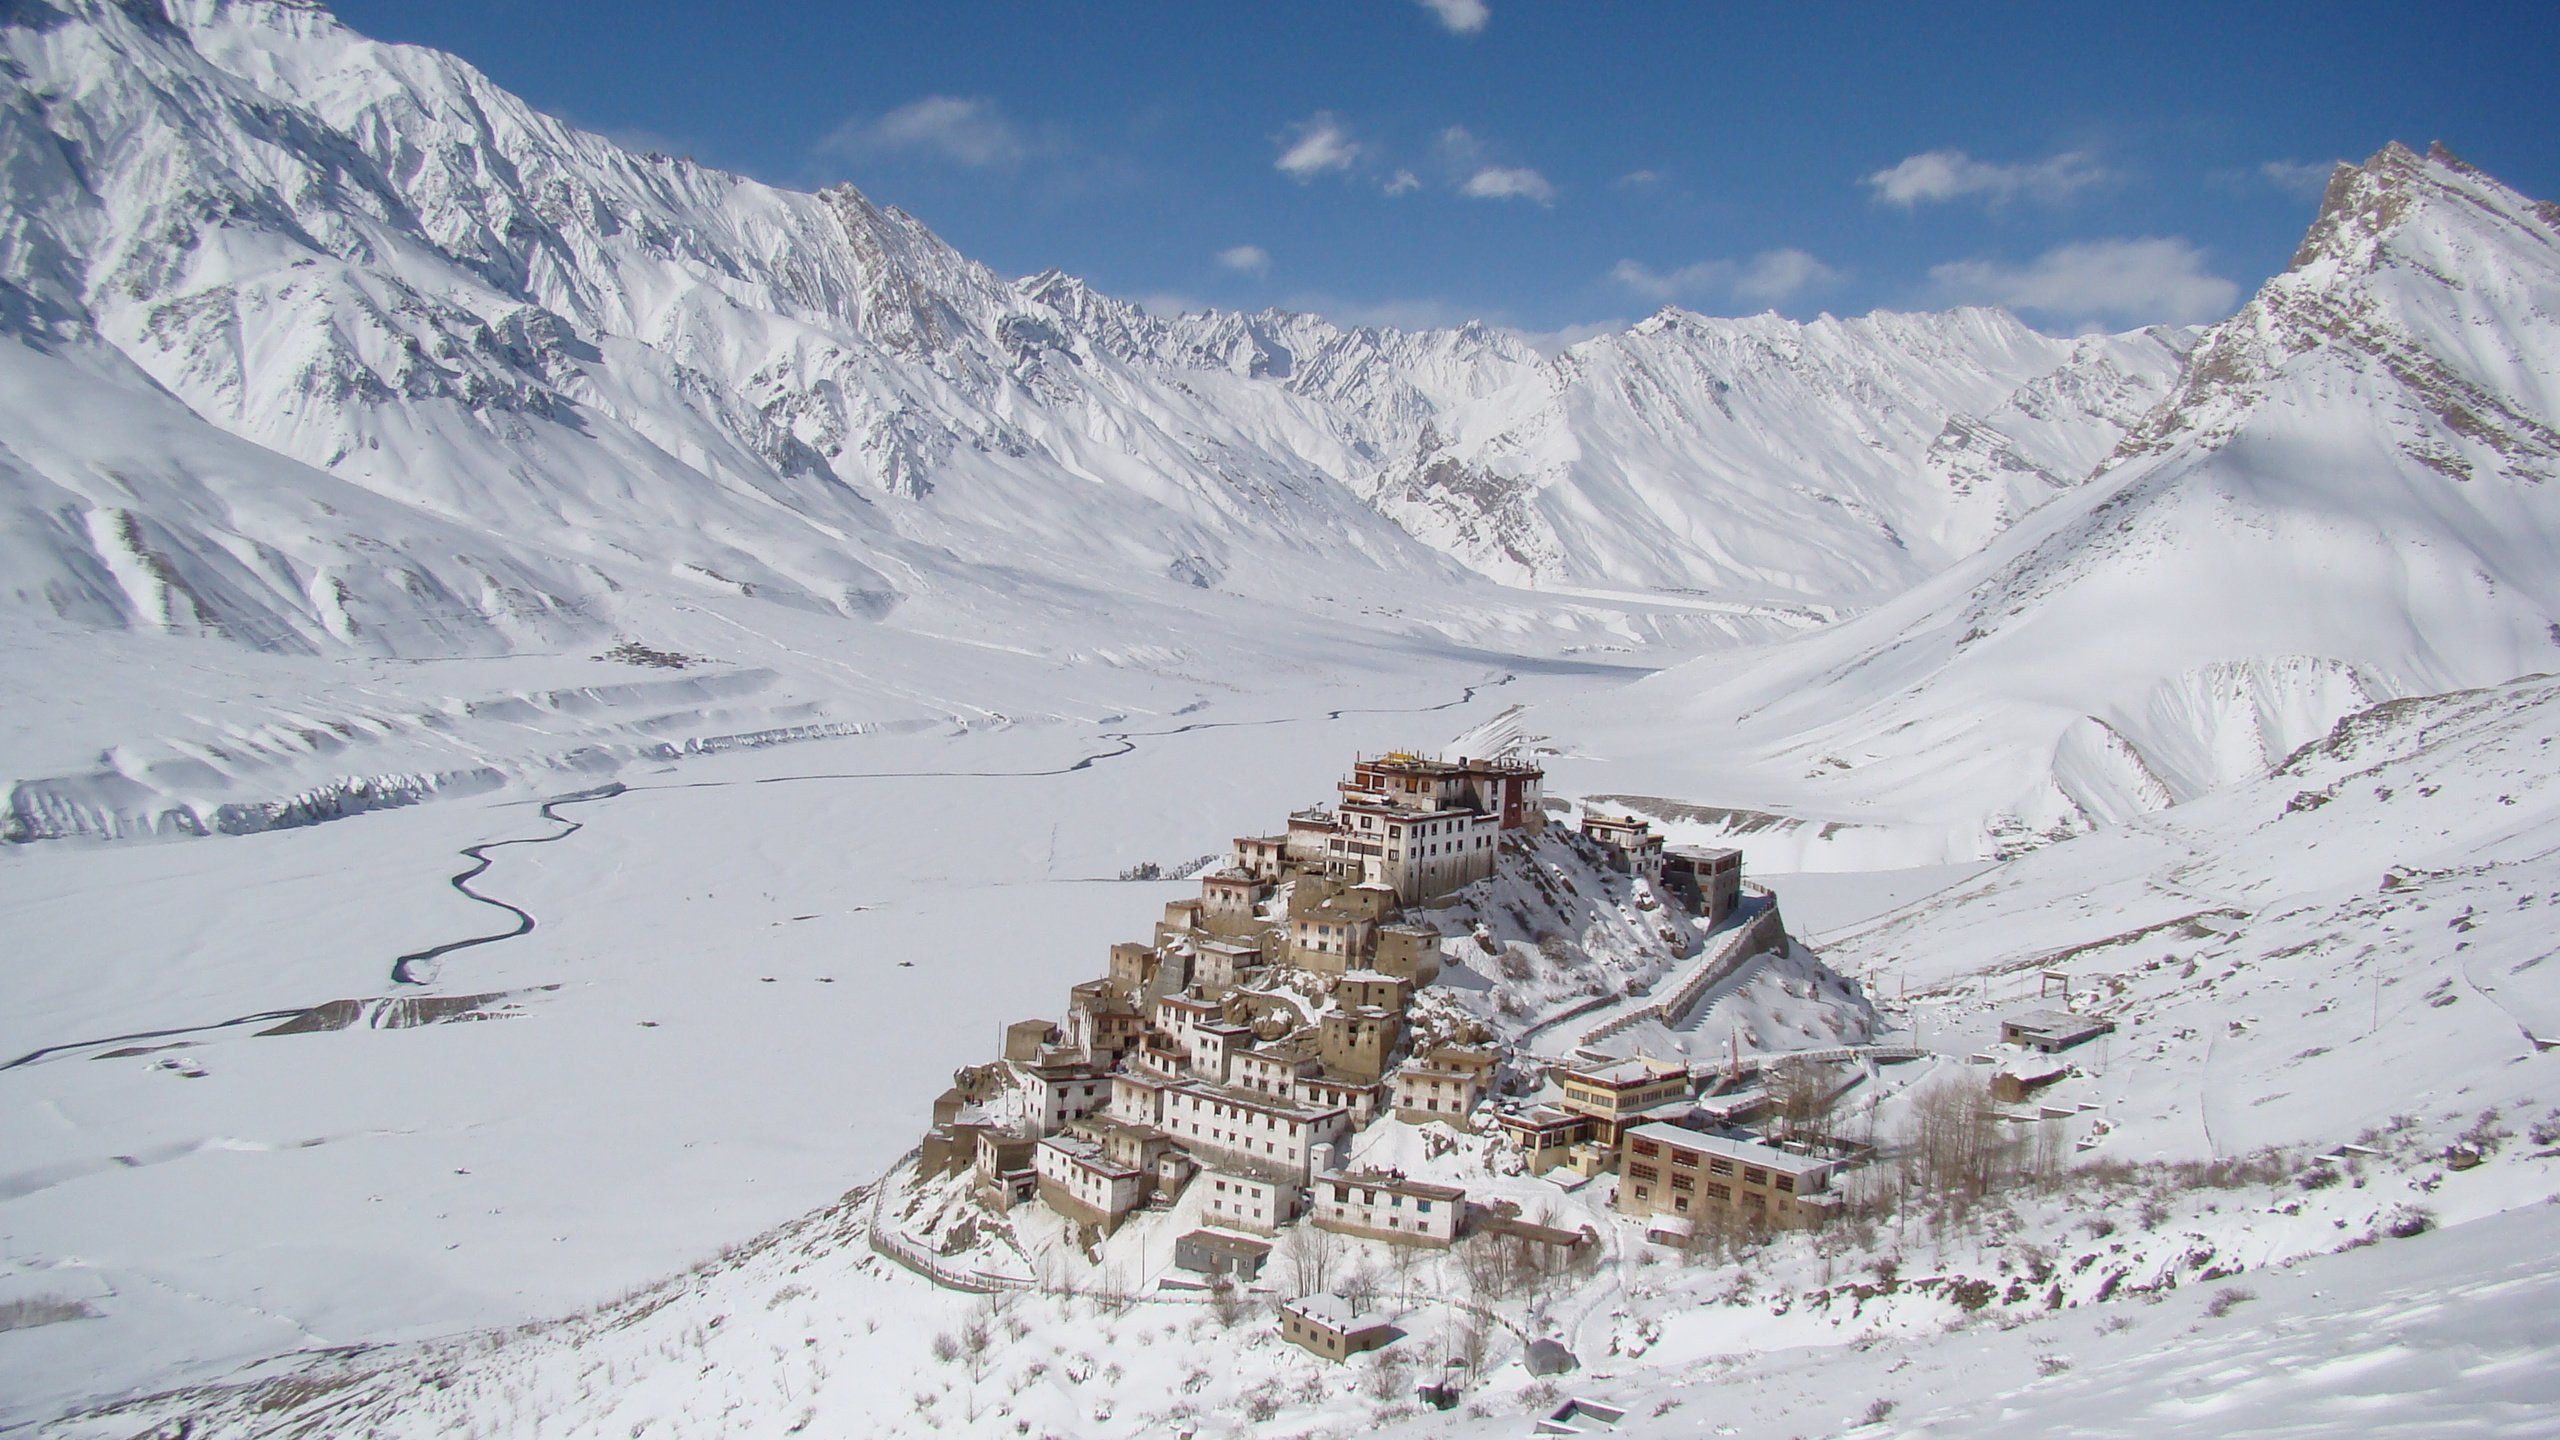 Spiti 4K wallpaper for your desktop or mobile screen free and easy to download